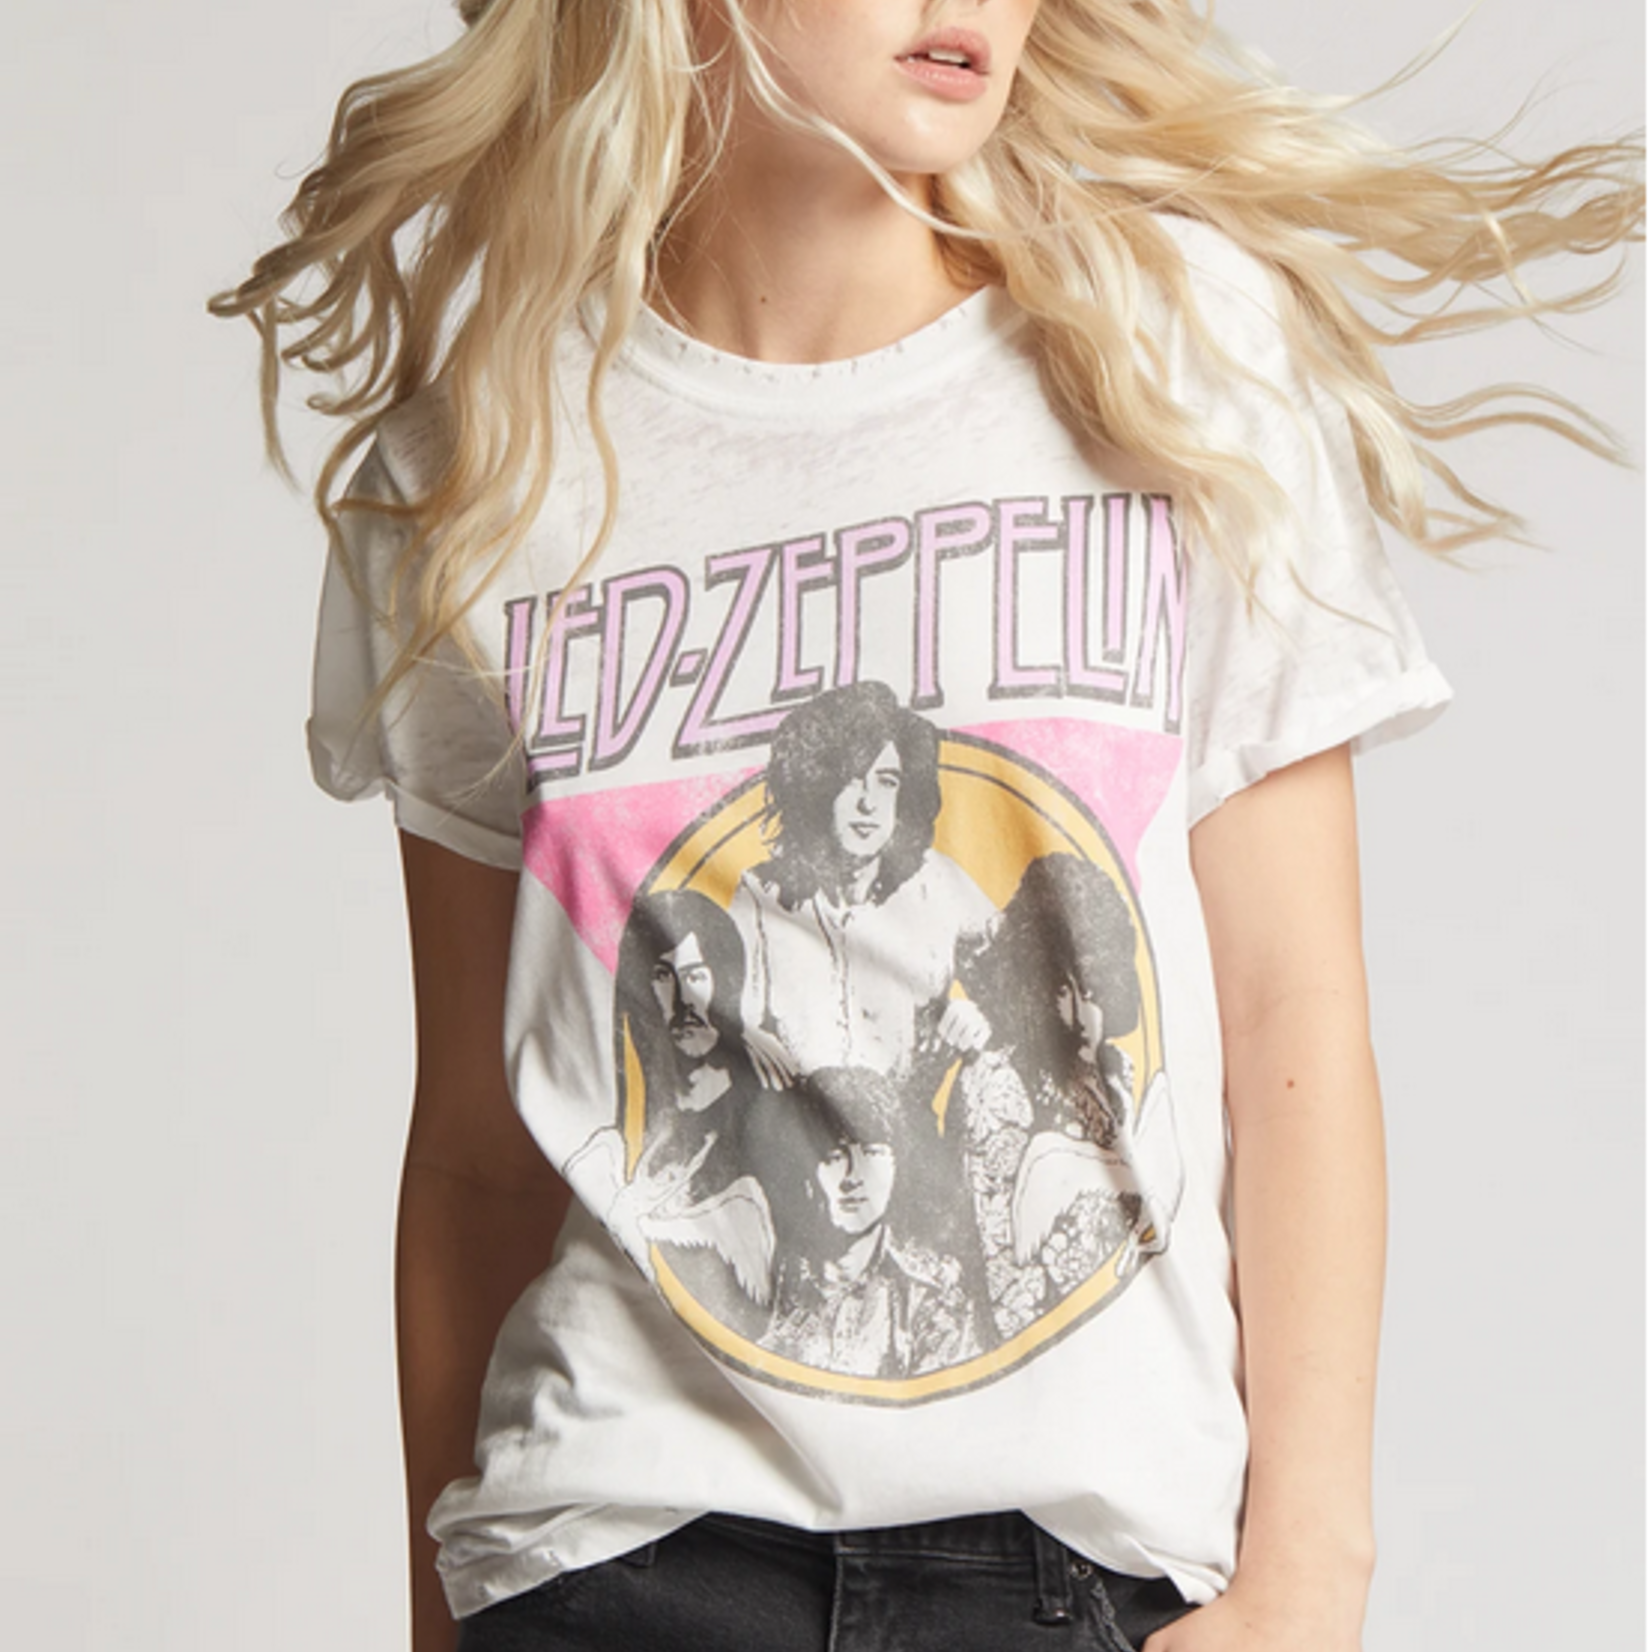 RECYCLED KARMA RECYCLED KARMA LED ZEPPELIN GRAPHIC BAND TSHIRT